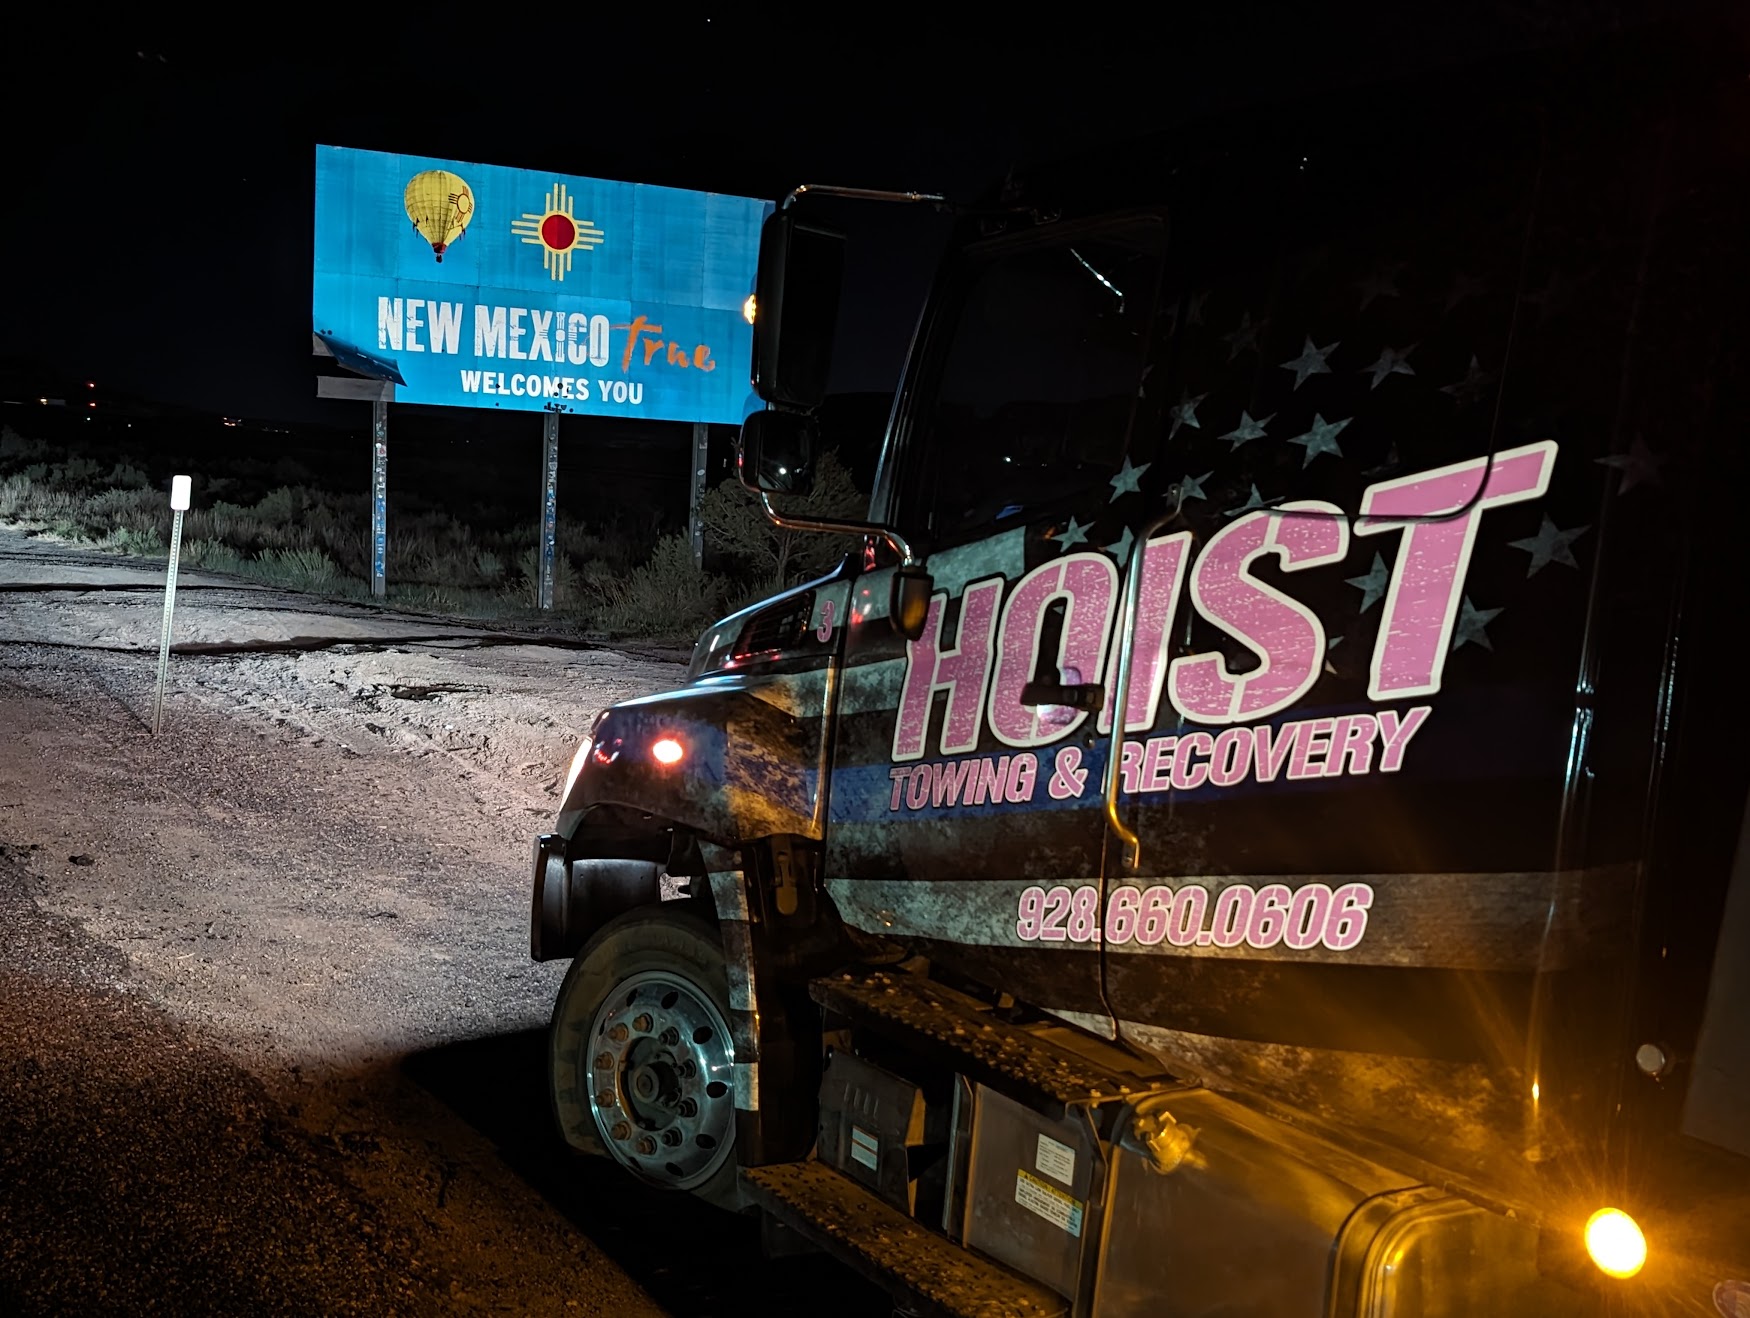 State to State Towing from New Mexico